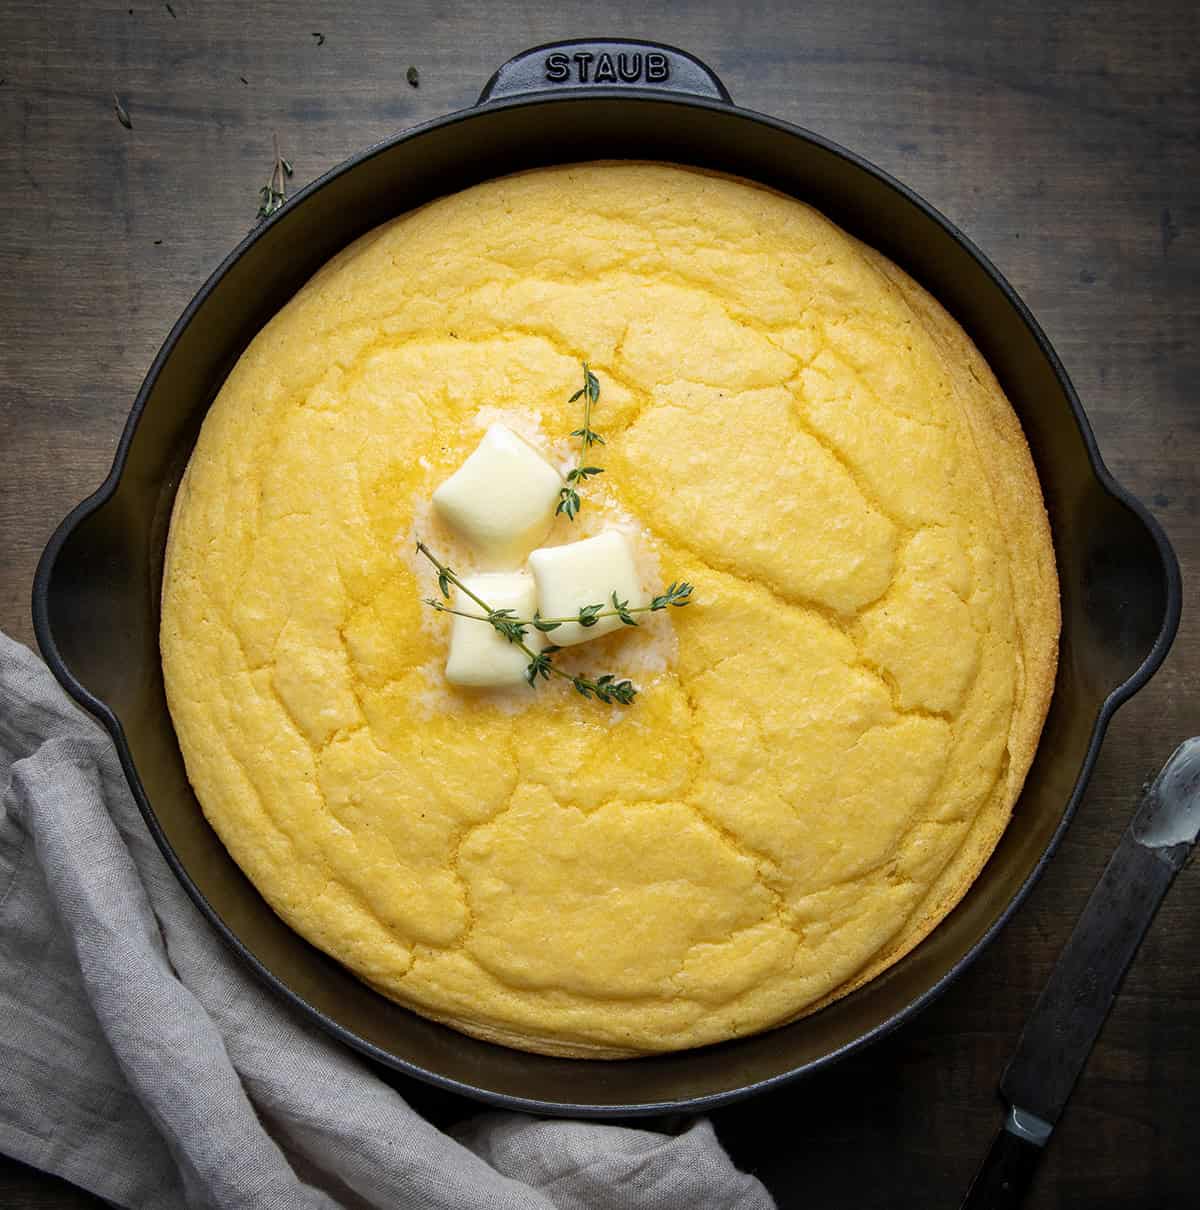 Country Homestyle Cornbread in a skillet on a wooden table from overhead.